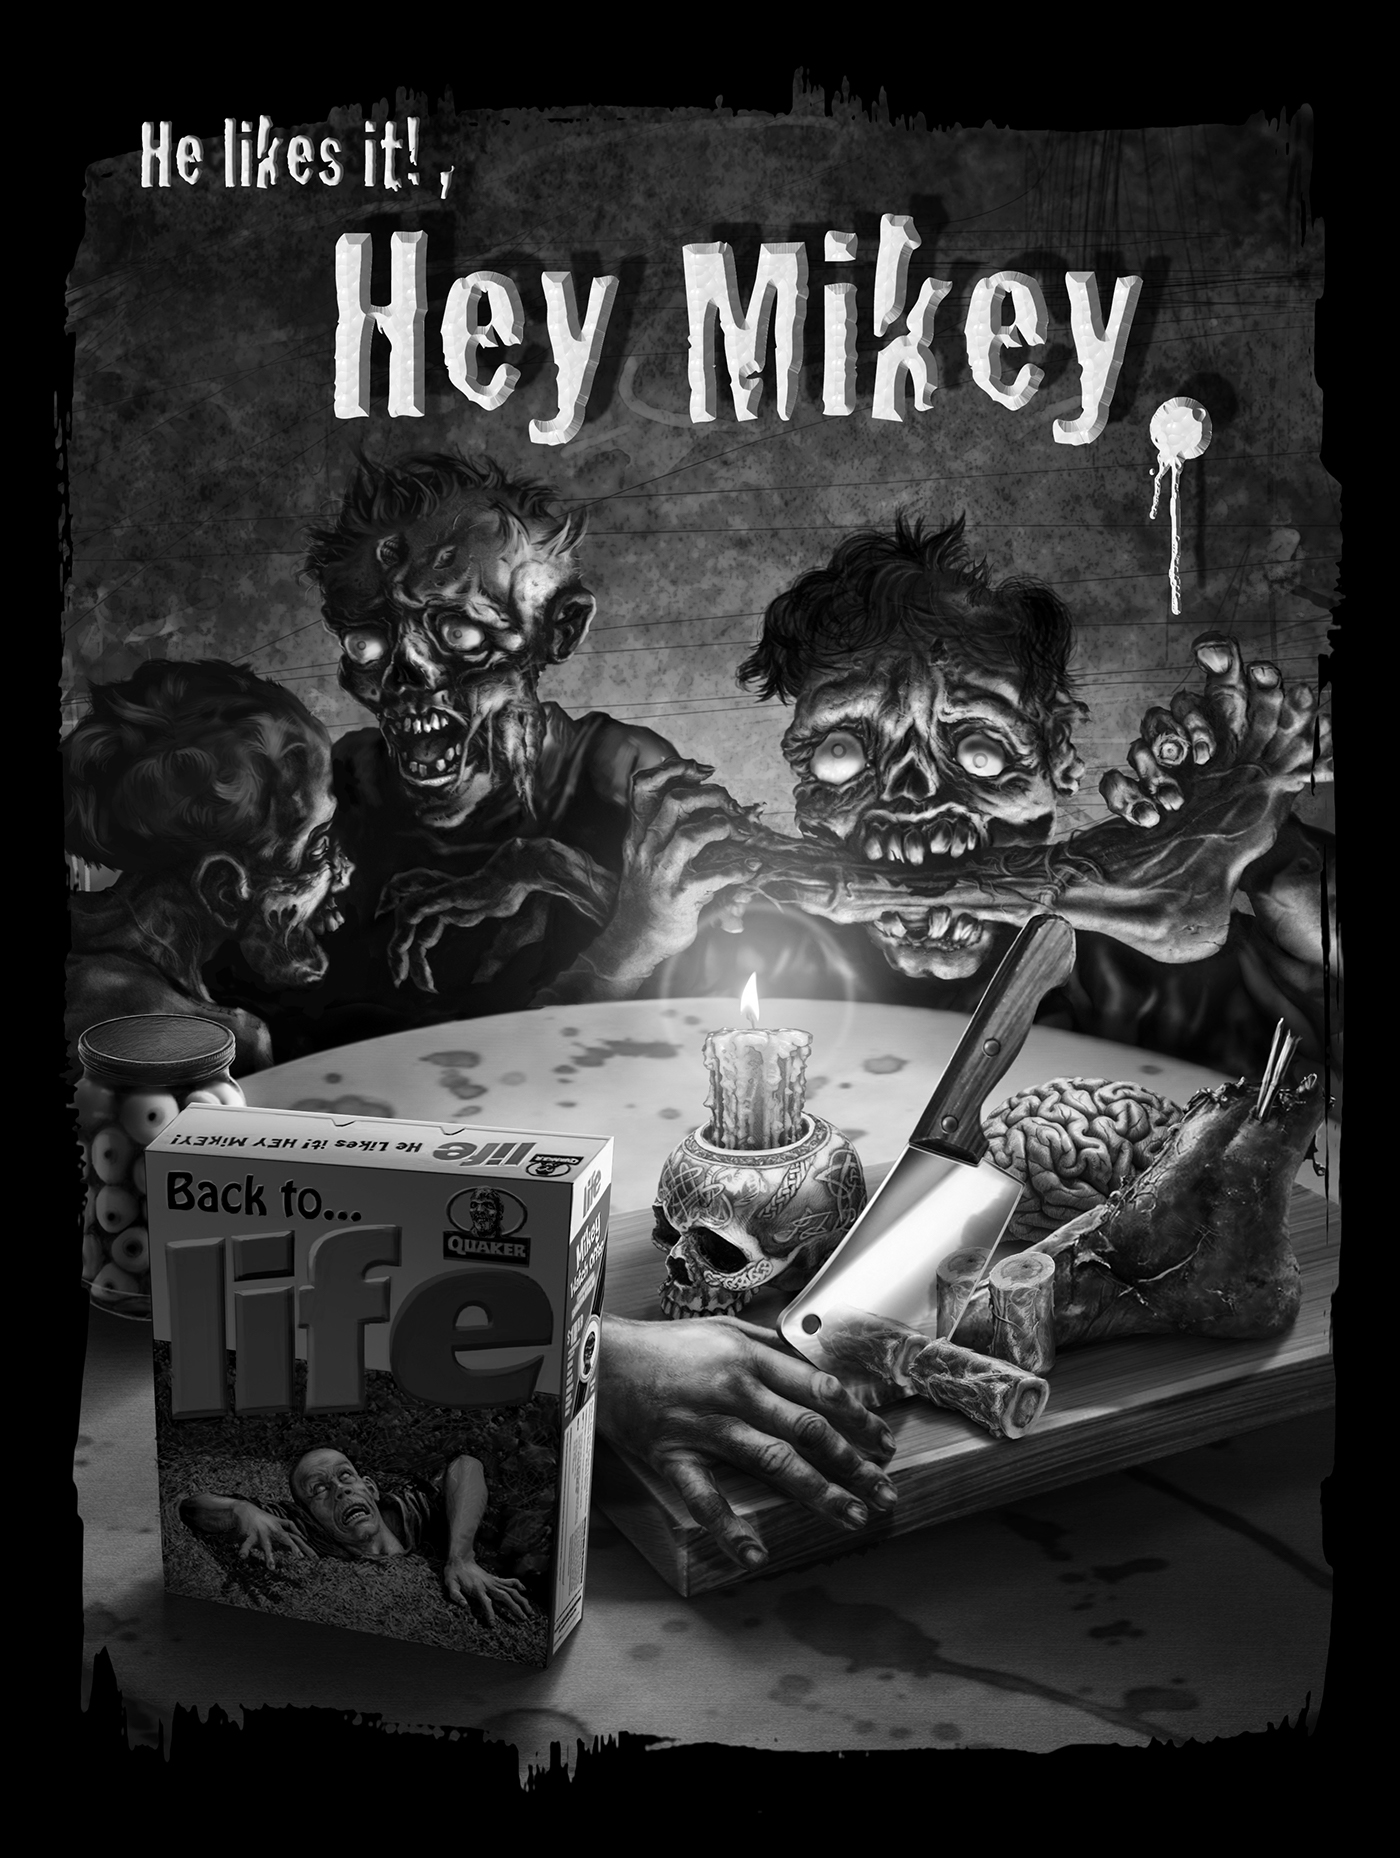 life zombie Life Cereal TV Ad mikey Hey Mikey He Likes It General Mills